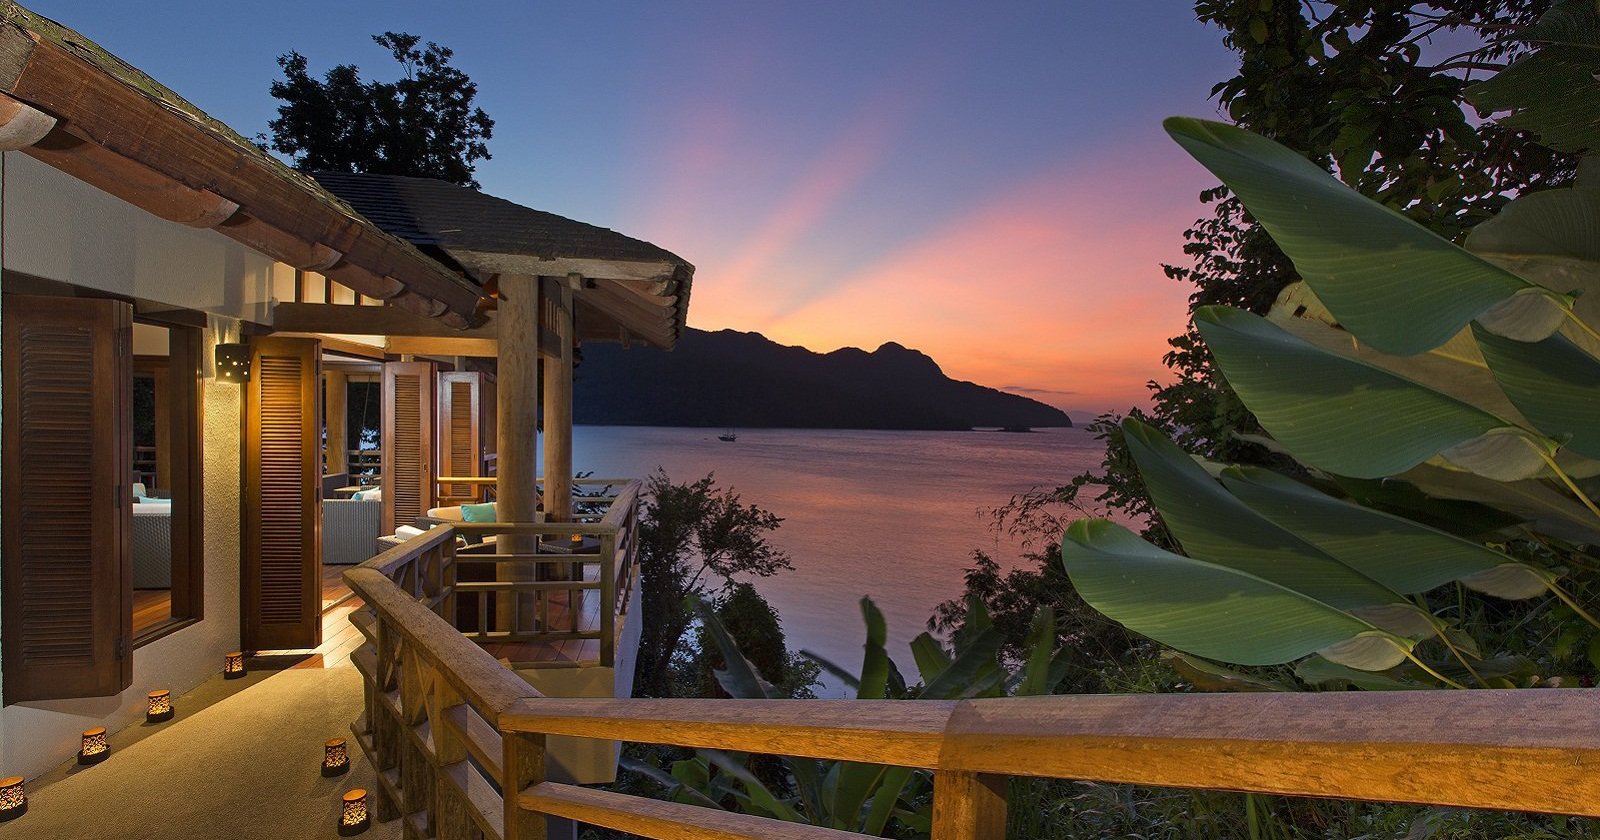 28 Best Places To Stay At In Malaysia's Most Loved Holiday Destinations